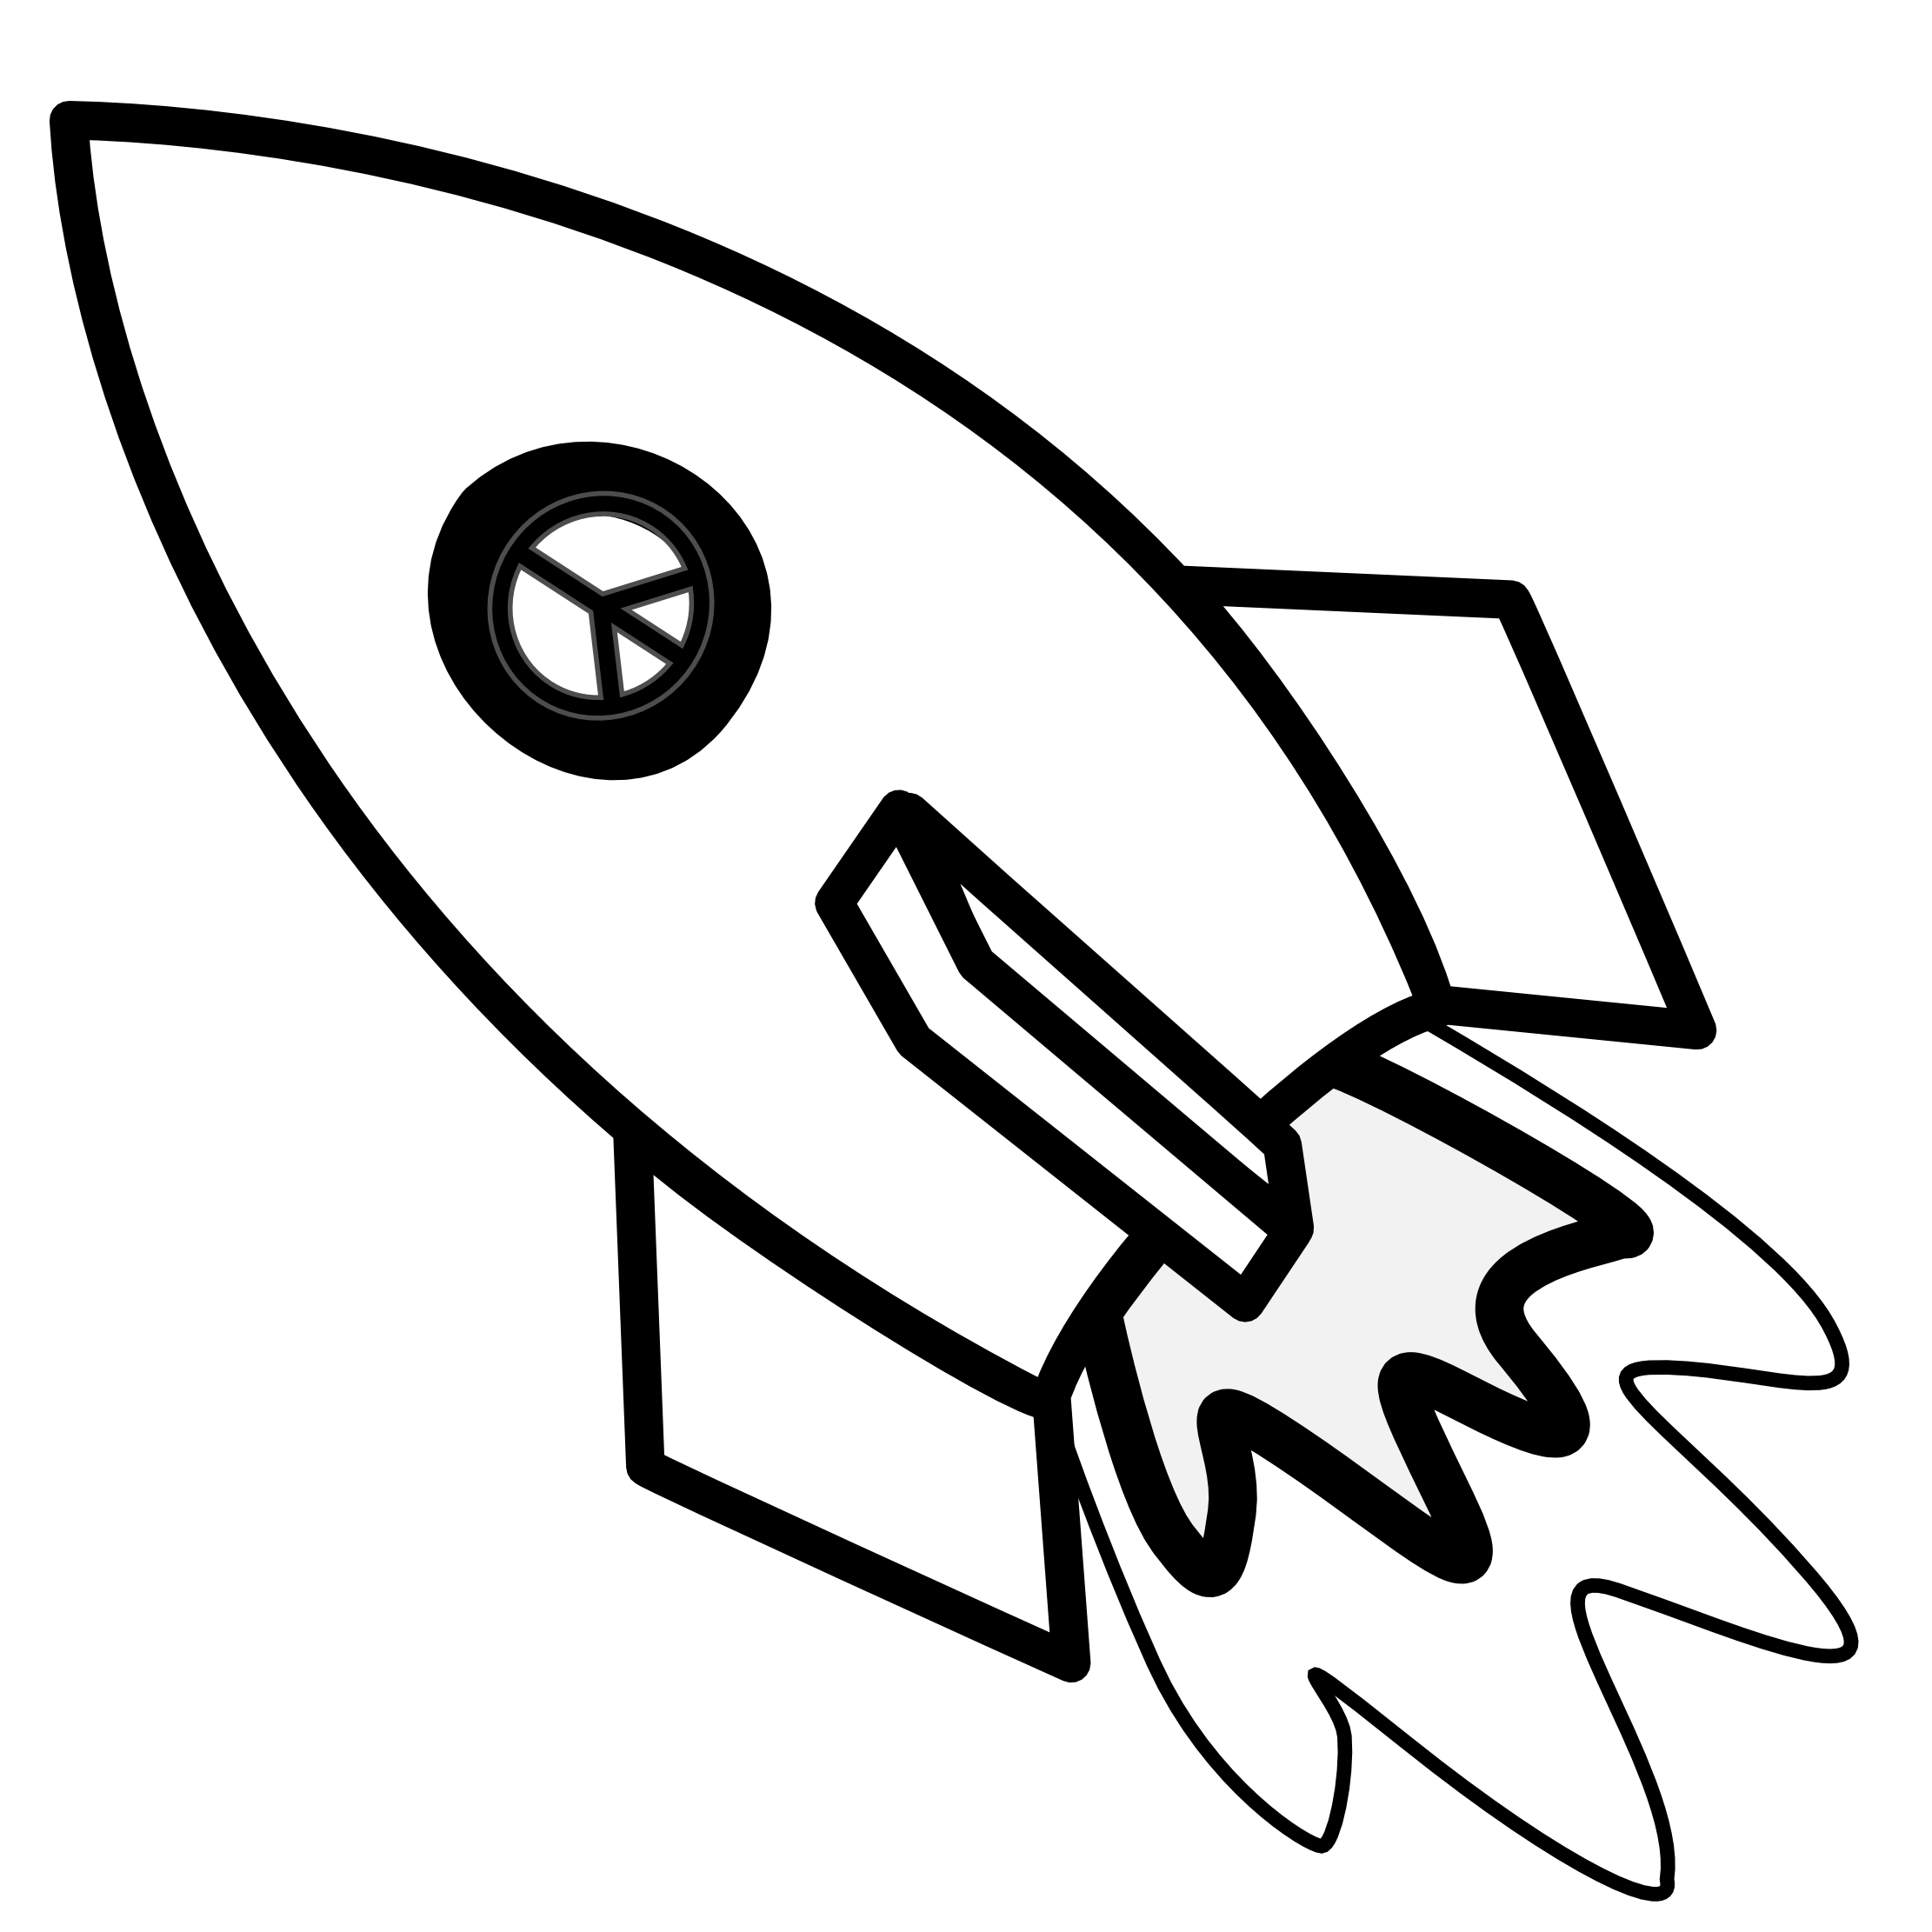 Peace clipart christmas. Rocket black and white